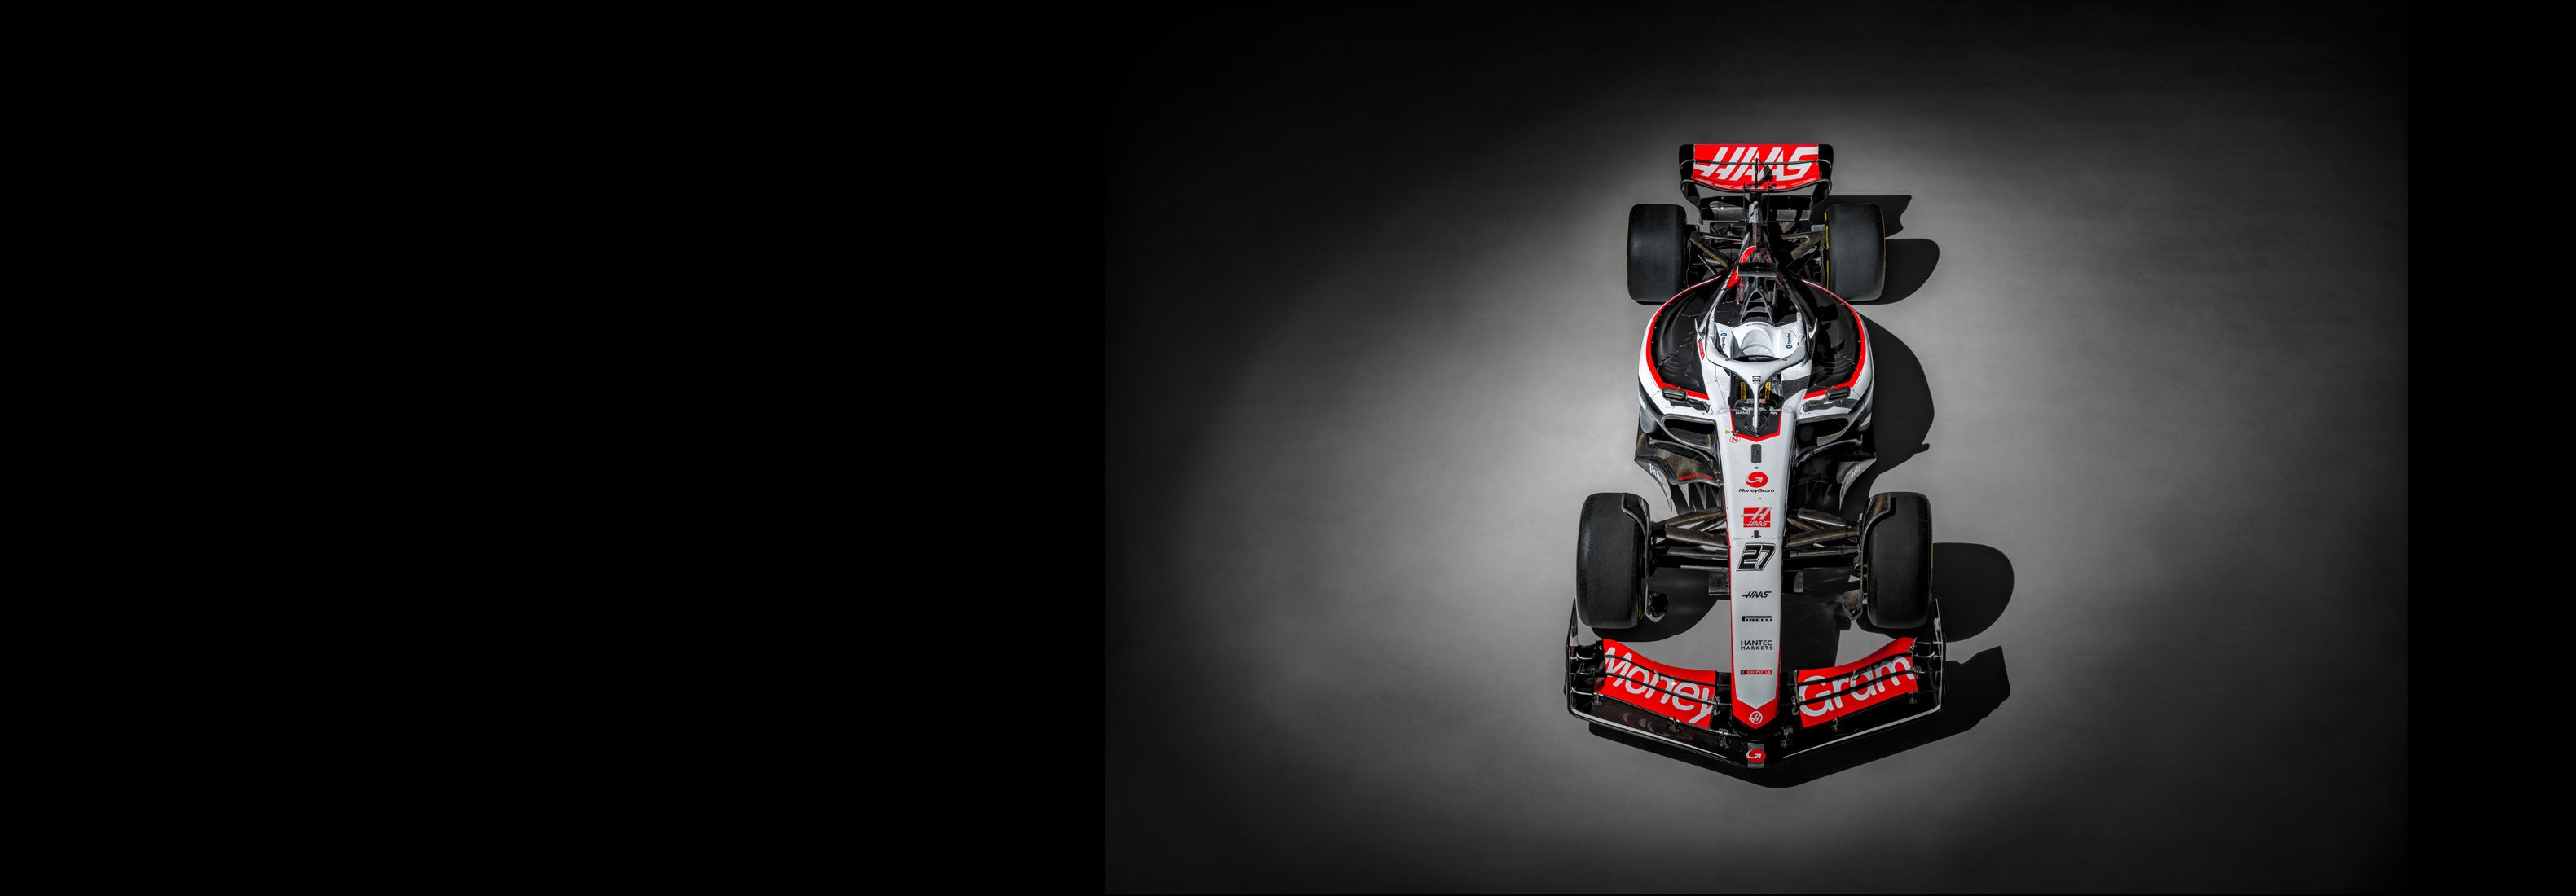 Photograph of the red, white, and black Haas F1 race car from above lit by a spotlight on the concrete floor of a airplane hanger.